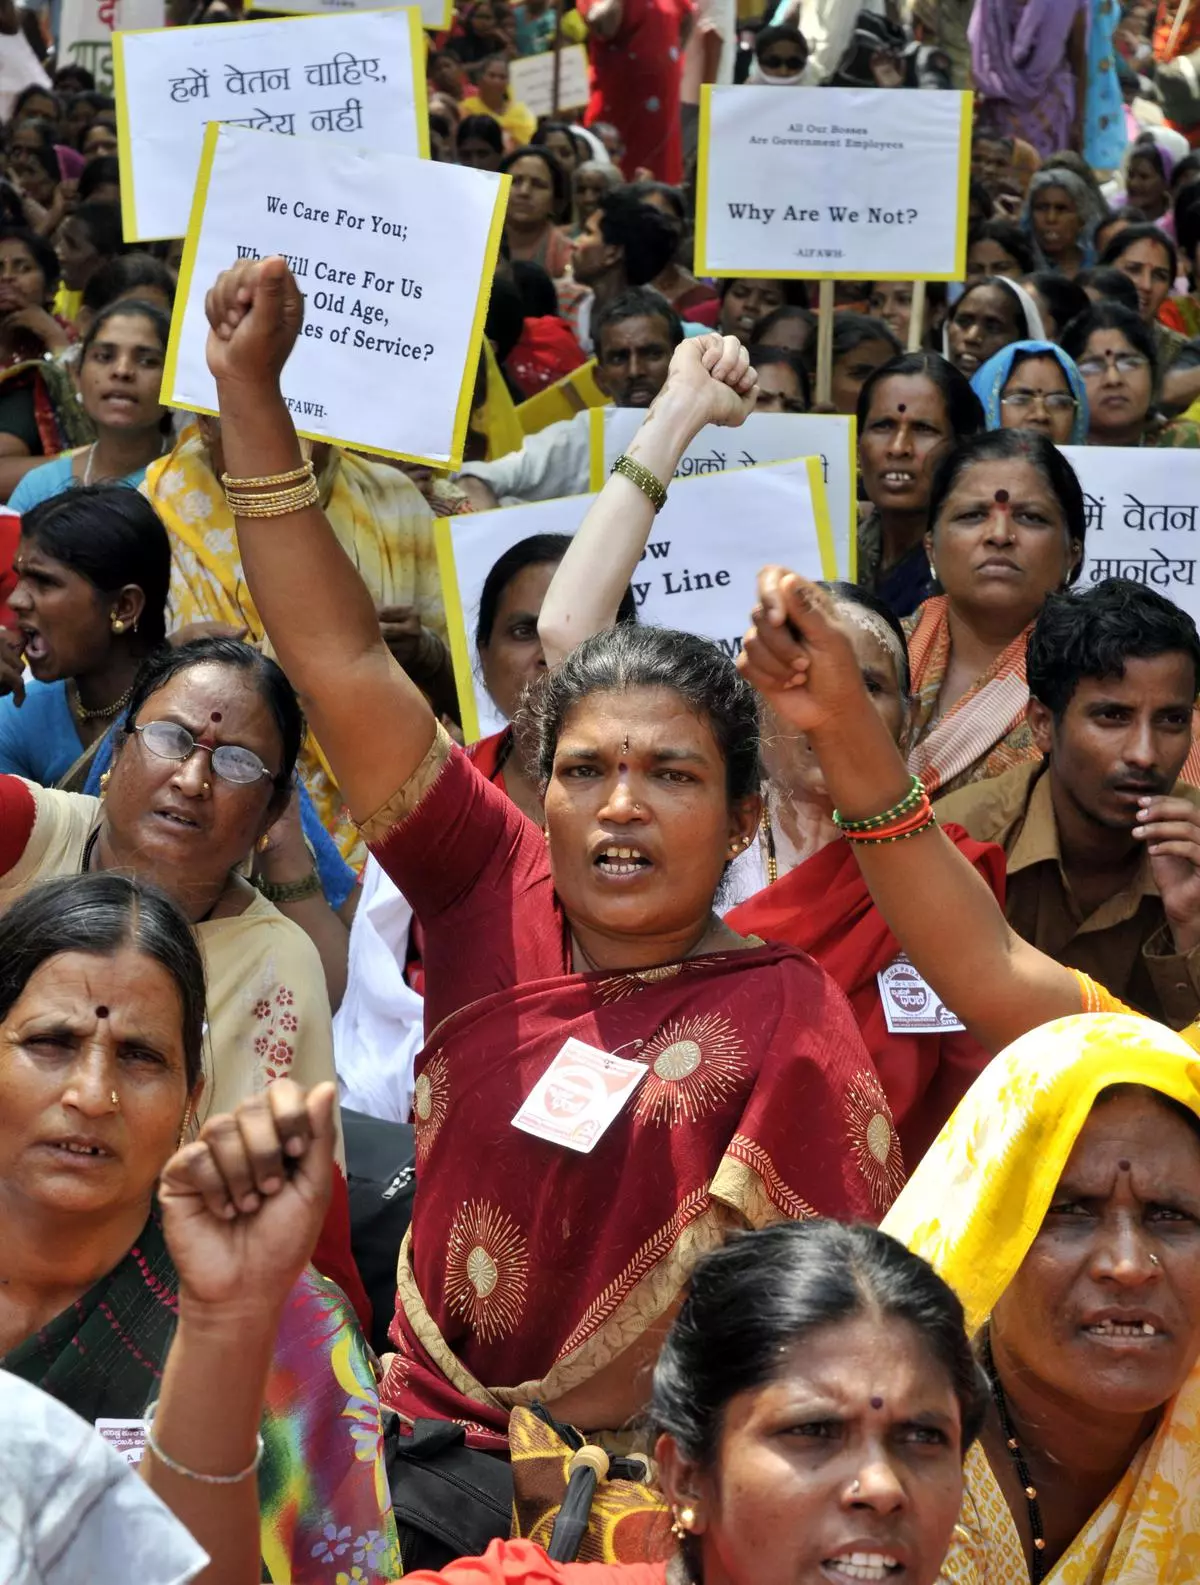 Members of the All India Federation of Anganwadi Workers and Helpers at protest rally at Jantar Mantar in New Delhi on May 4, 2010.